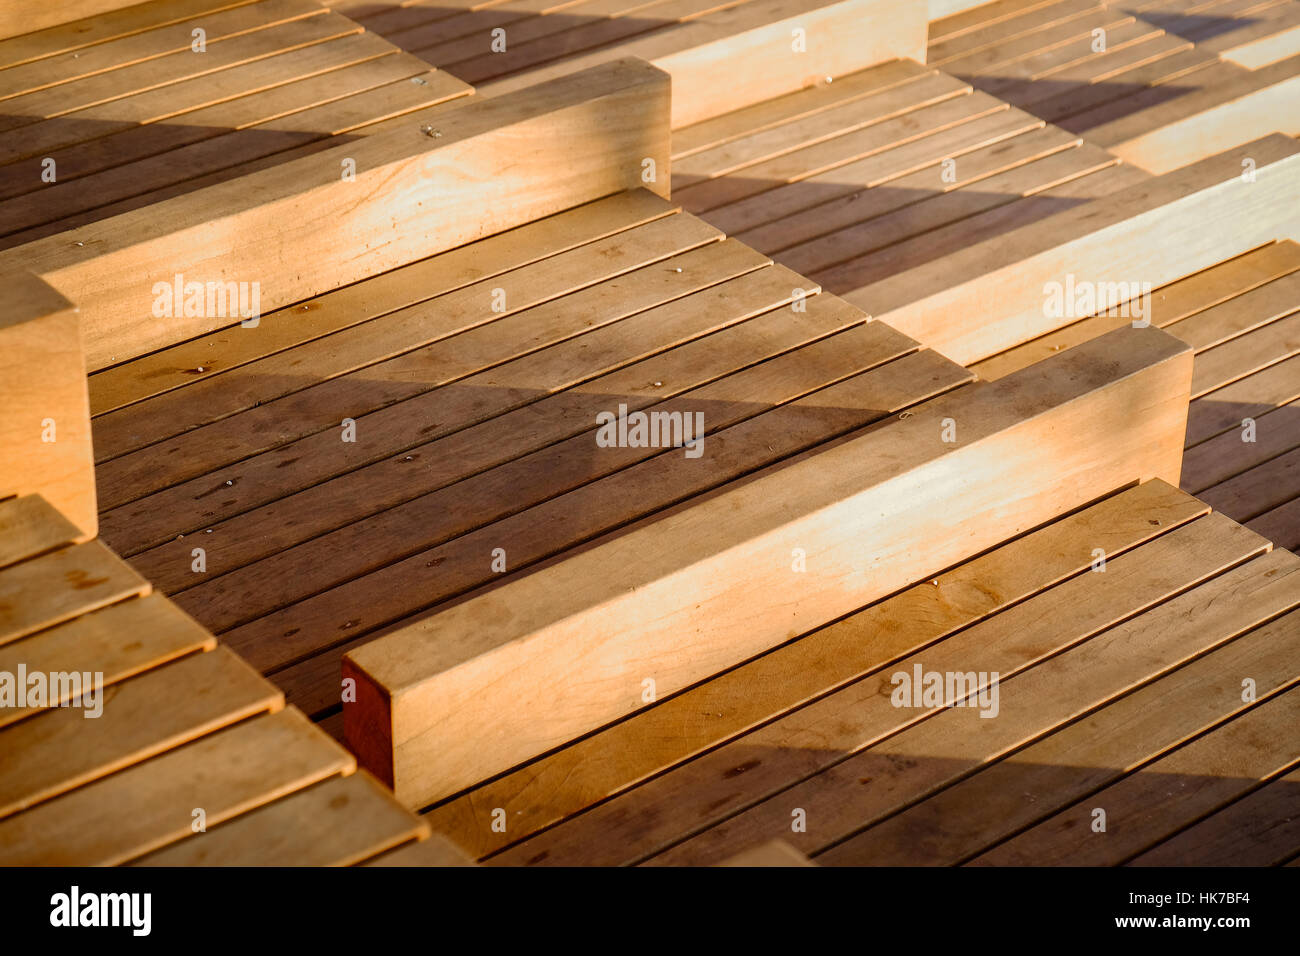 A series of wooden seats cast shadows in the setting sun Stock Photo